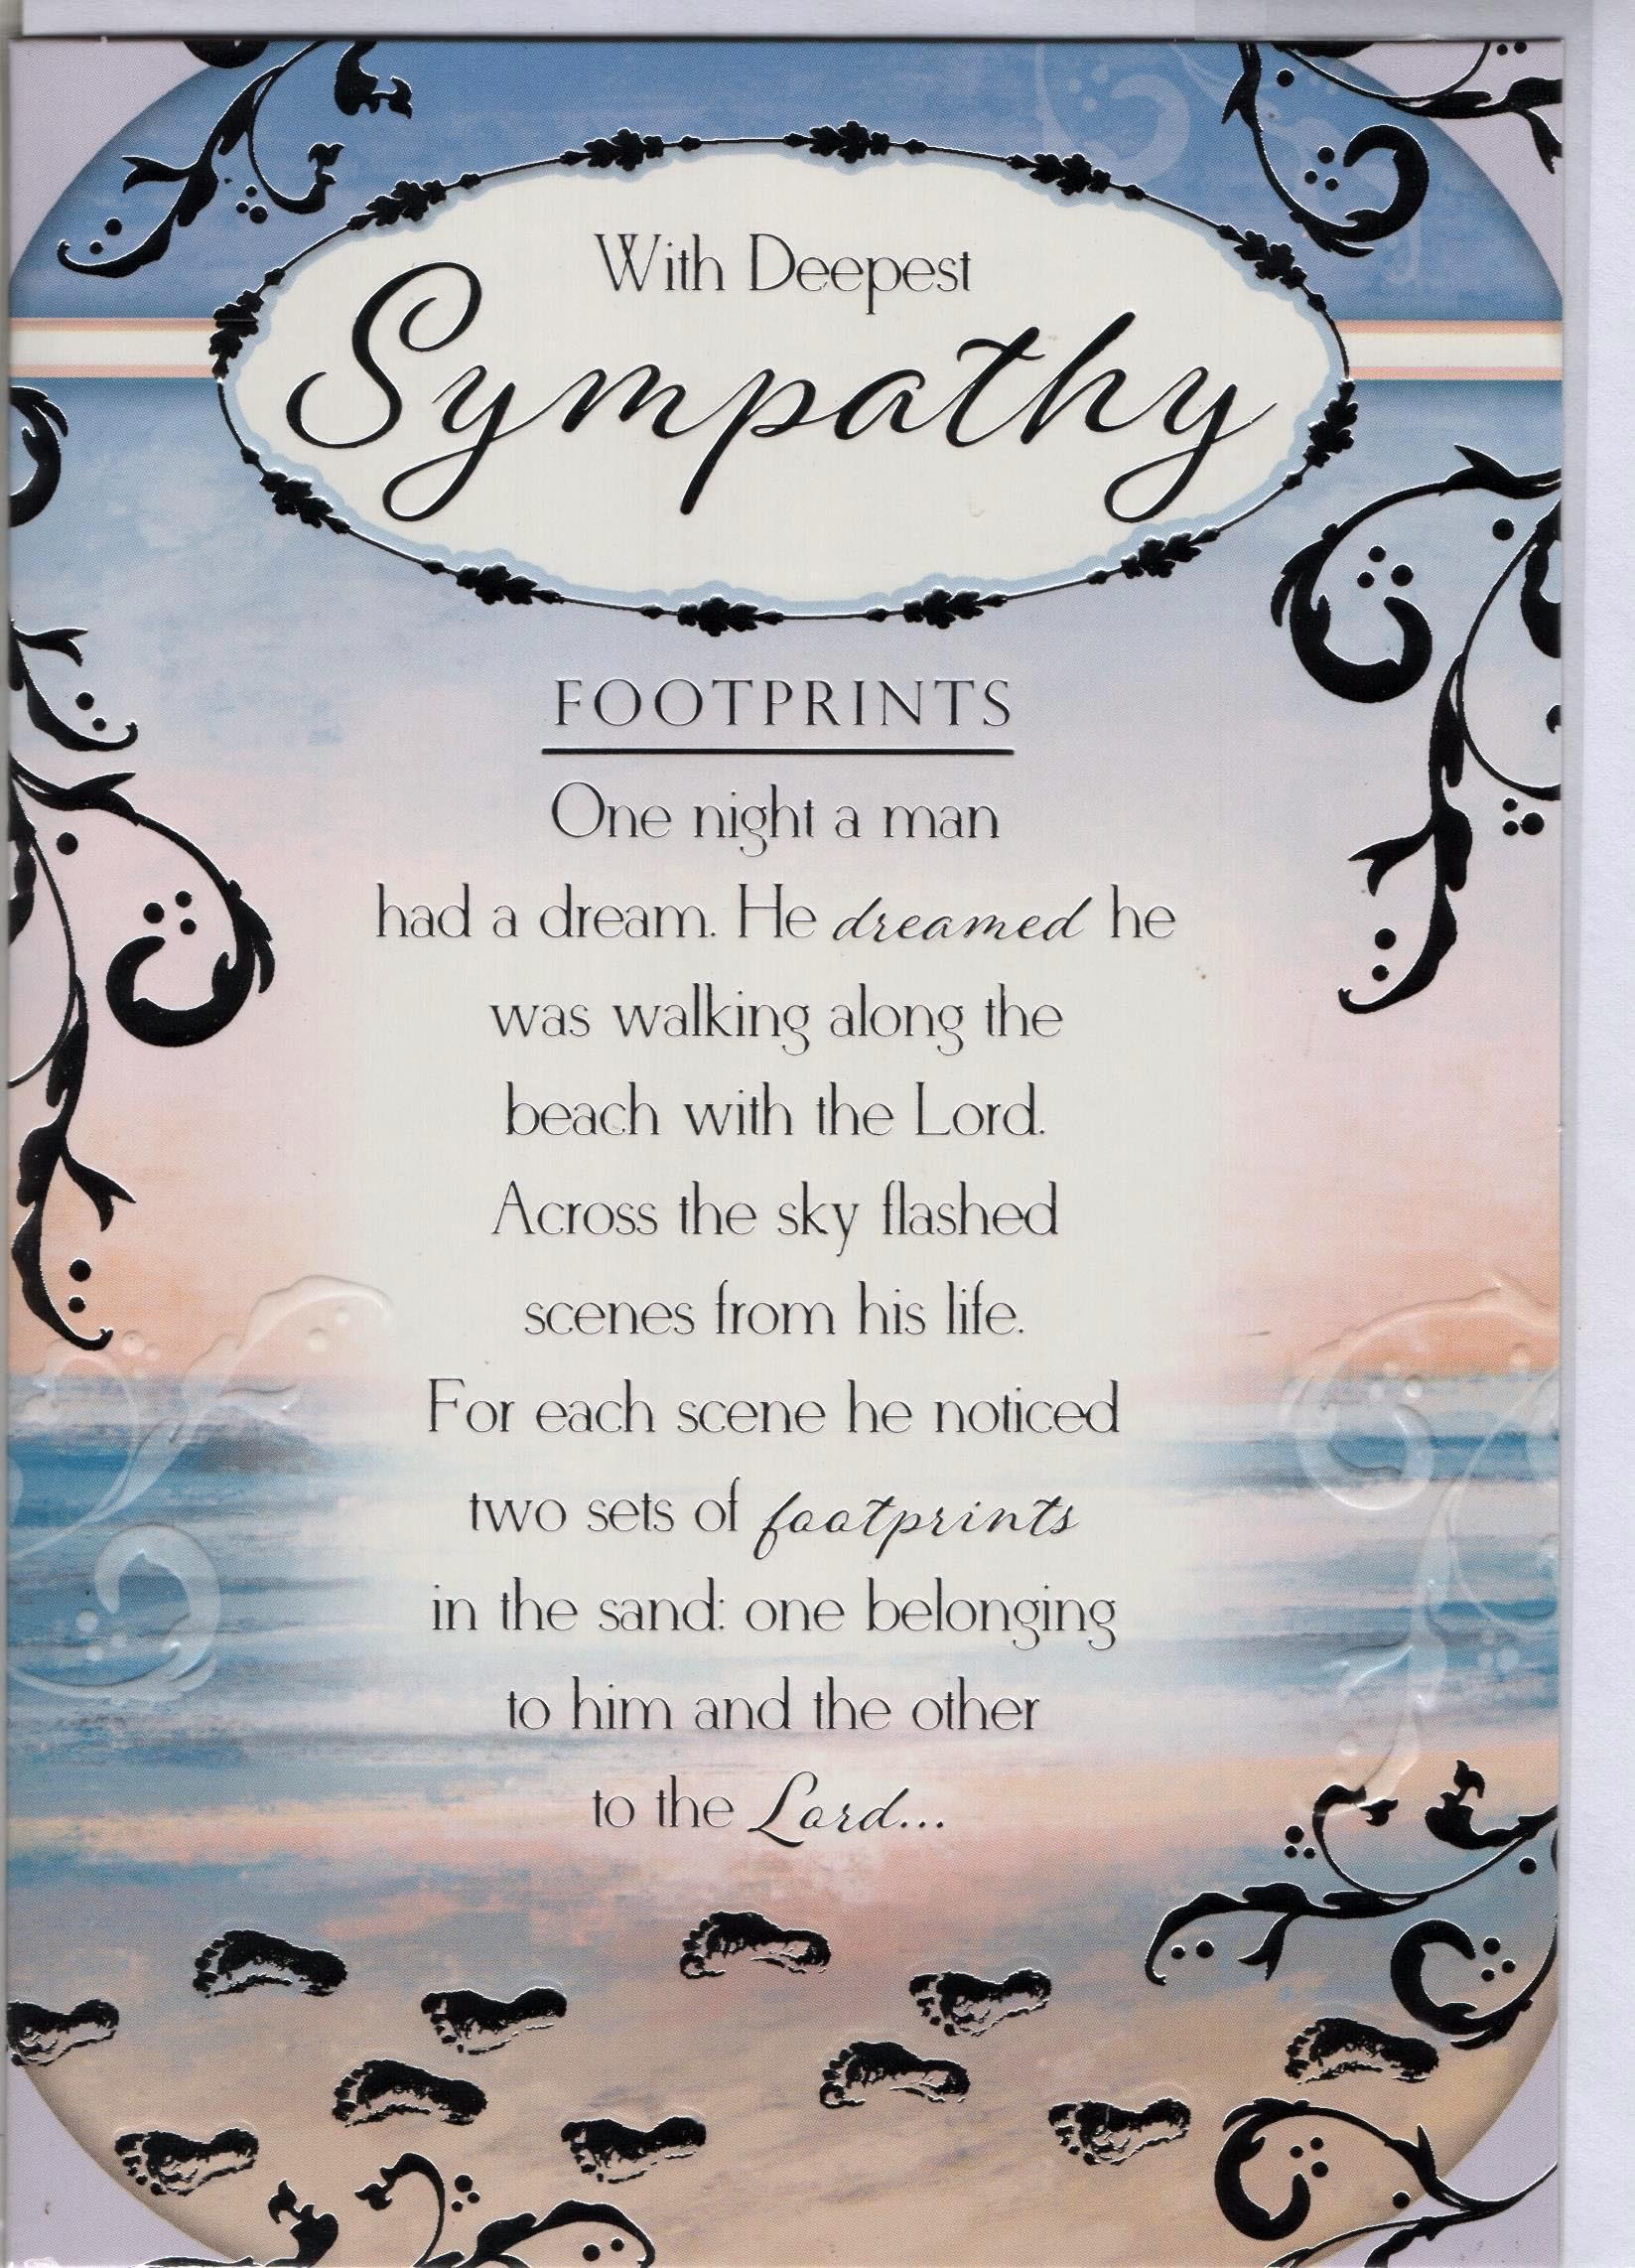 With Deepest Sympathy footprints